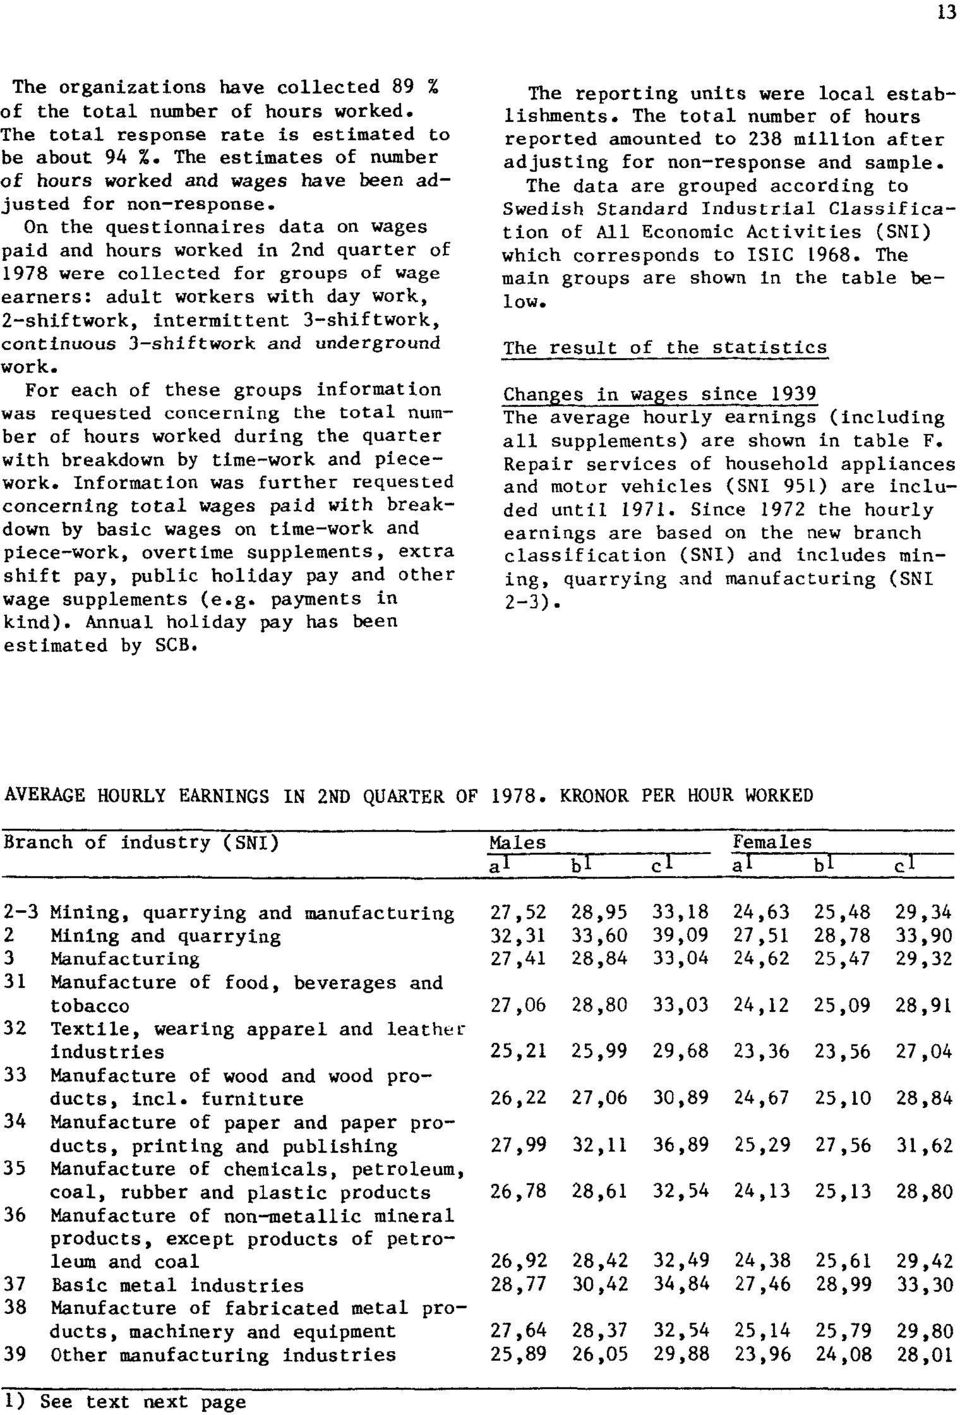 On the questionnaires data on wages paid and hours worked in 2nd quarter of 1978 were collected for groups of wage earners: adult workers with day work, 2-shiftwork, intermittent 3-shiftwork,